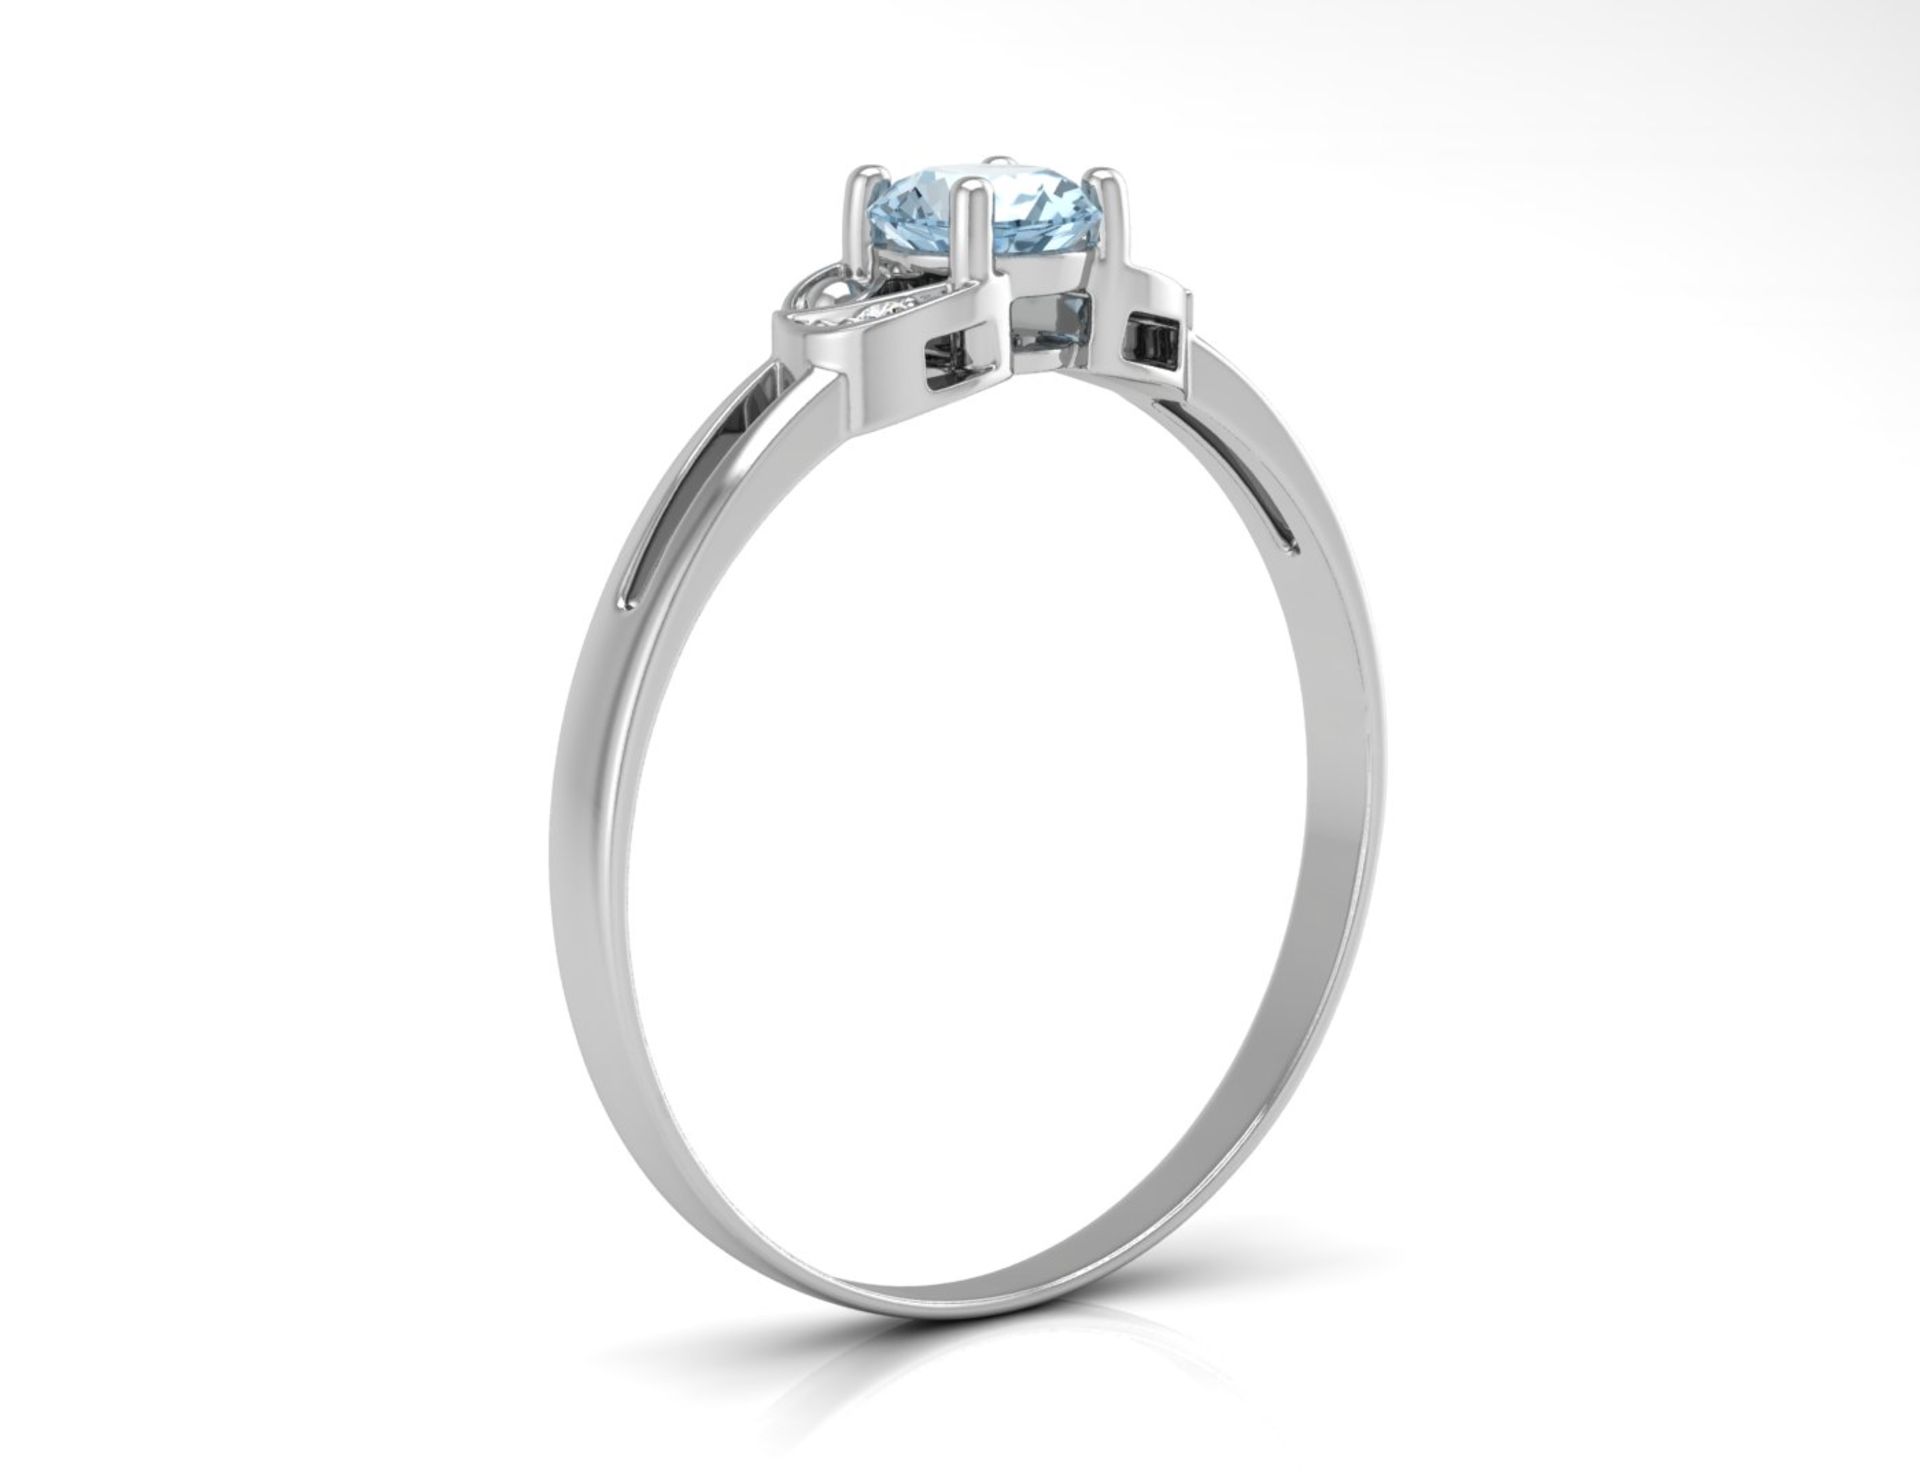 9ct White Gold Fancy Cluster Diamond And Blue Topaz Ring 0.01 Carats - Image 2 of 4